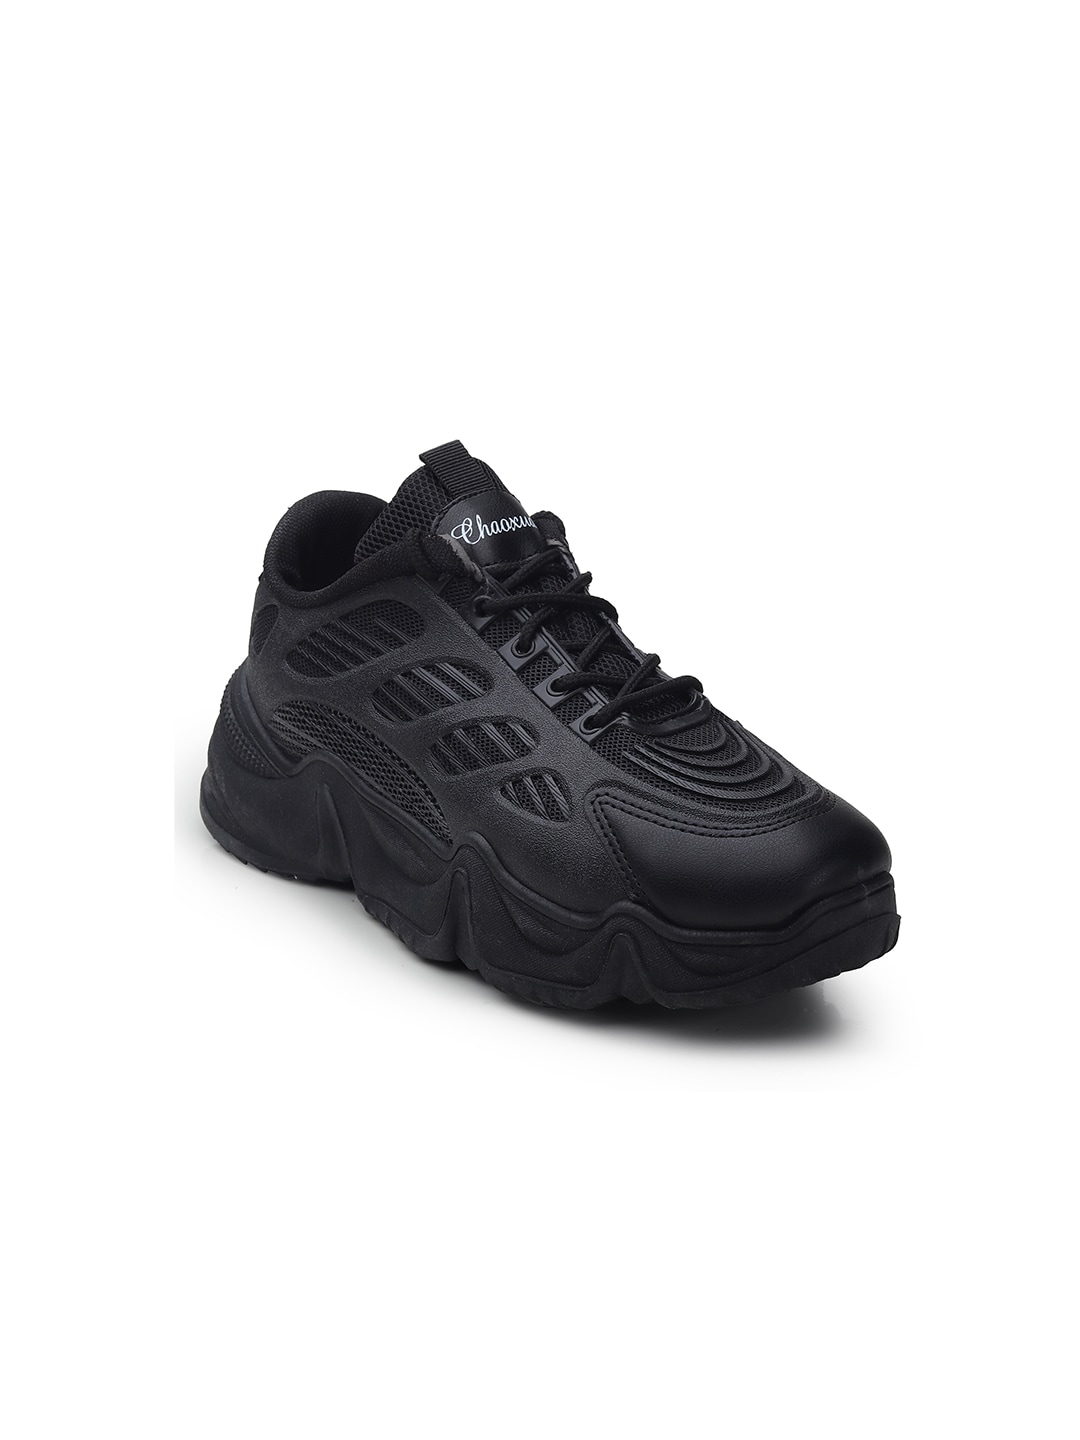 CASSIEY Women Black Mesh Walking Shoes Price in India